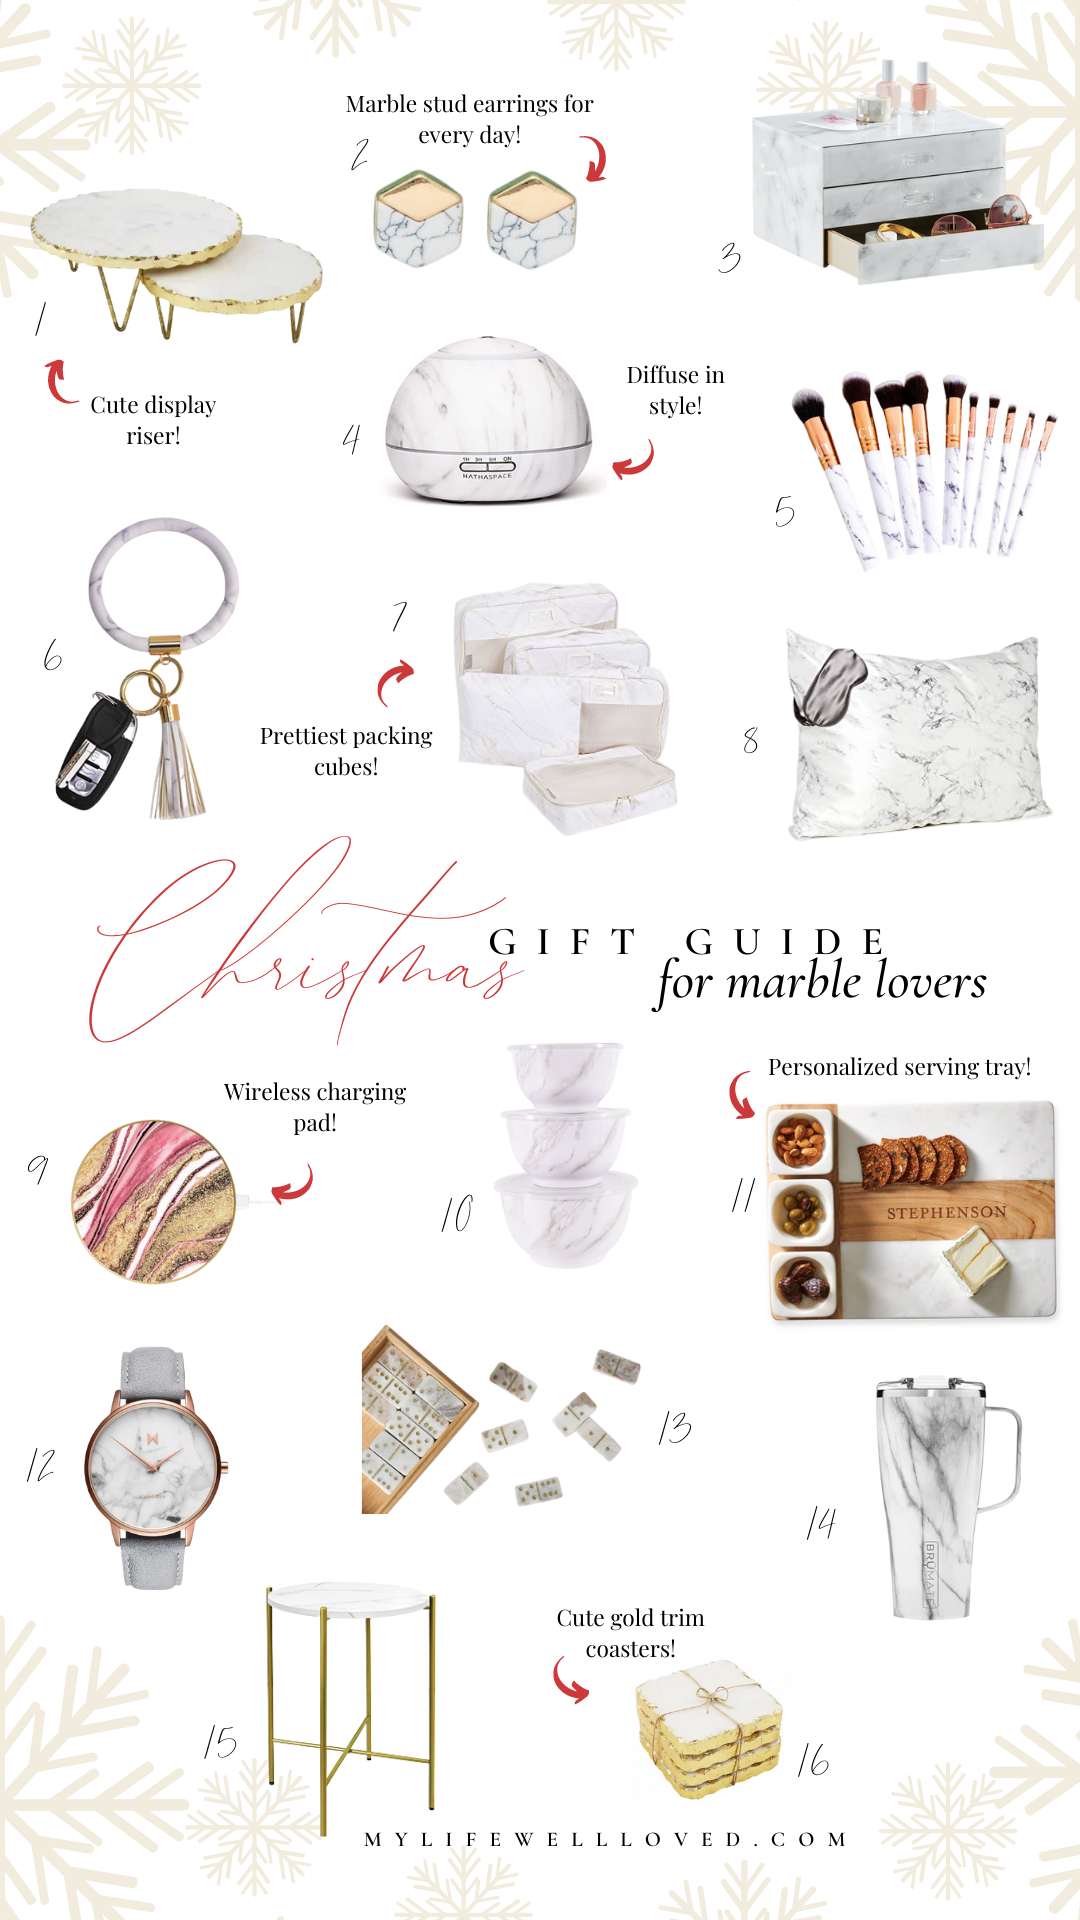 Lifestyle + fashion blogger, My Life Well Loved, shares Holiday Shopping: 16 White Marble Gifts for Anyone Who Has Style!